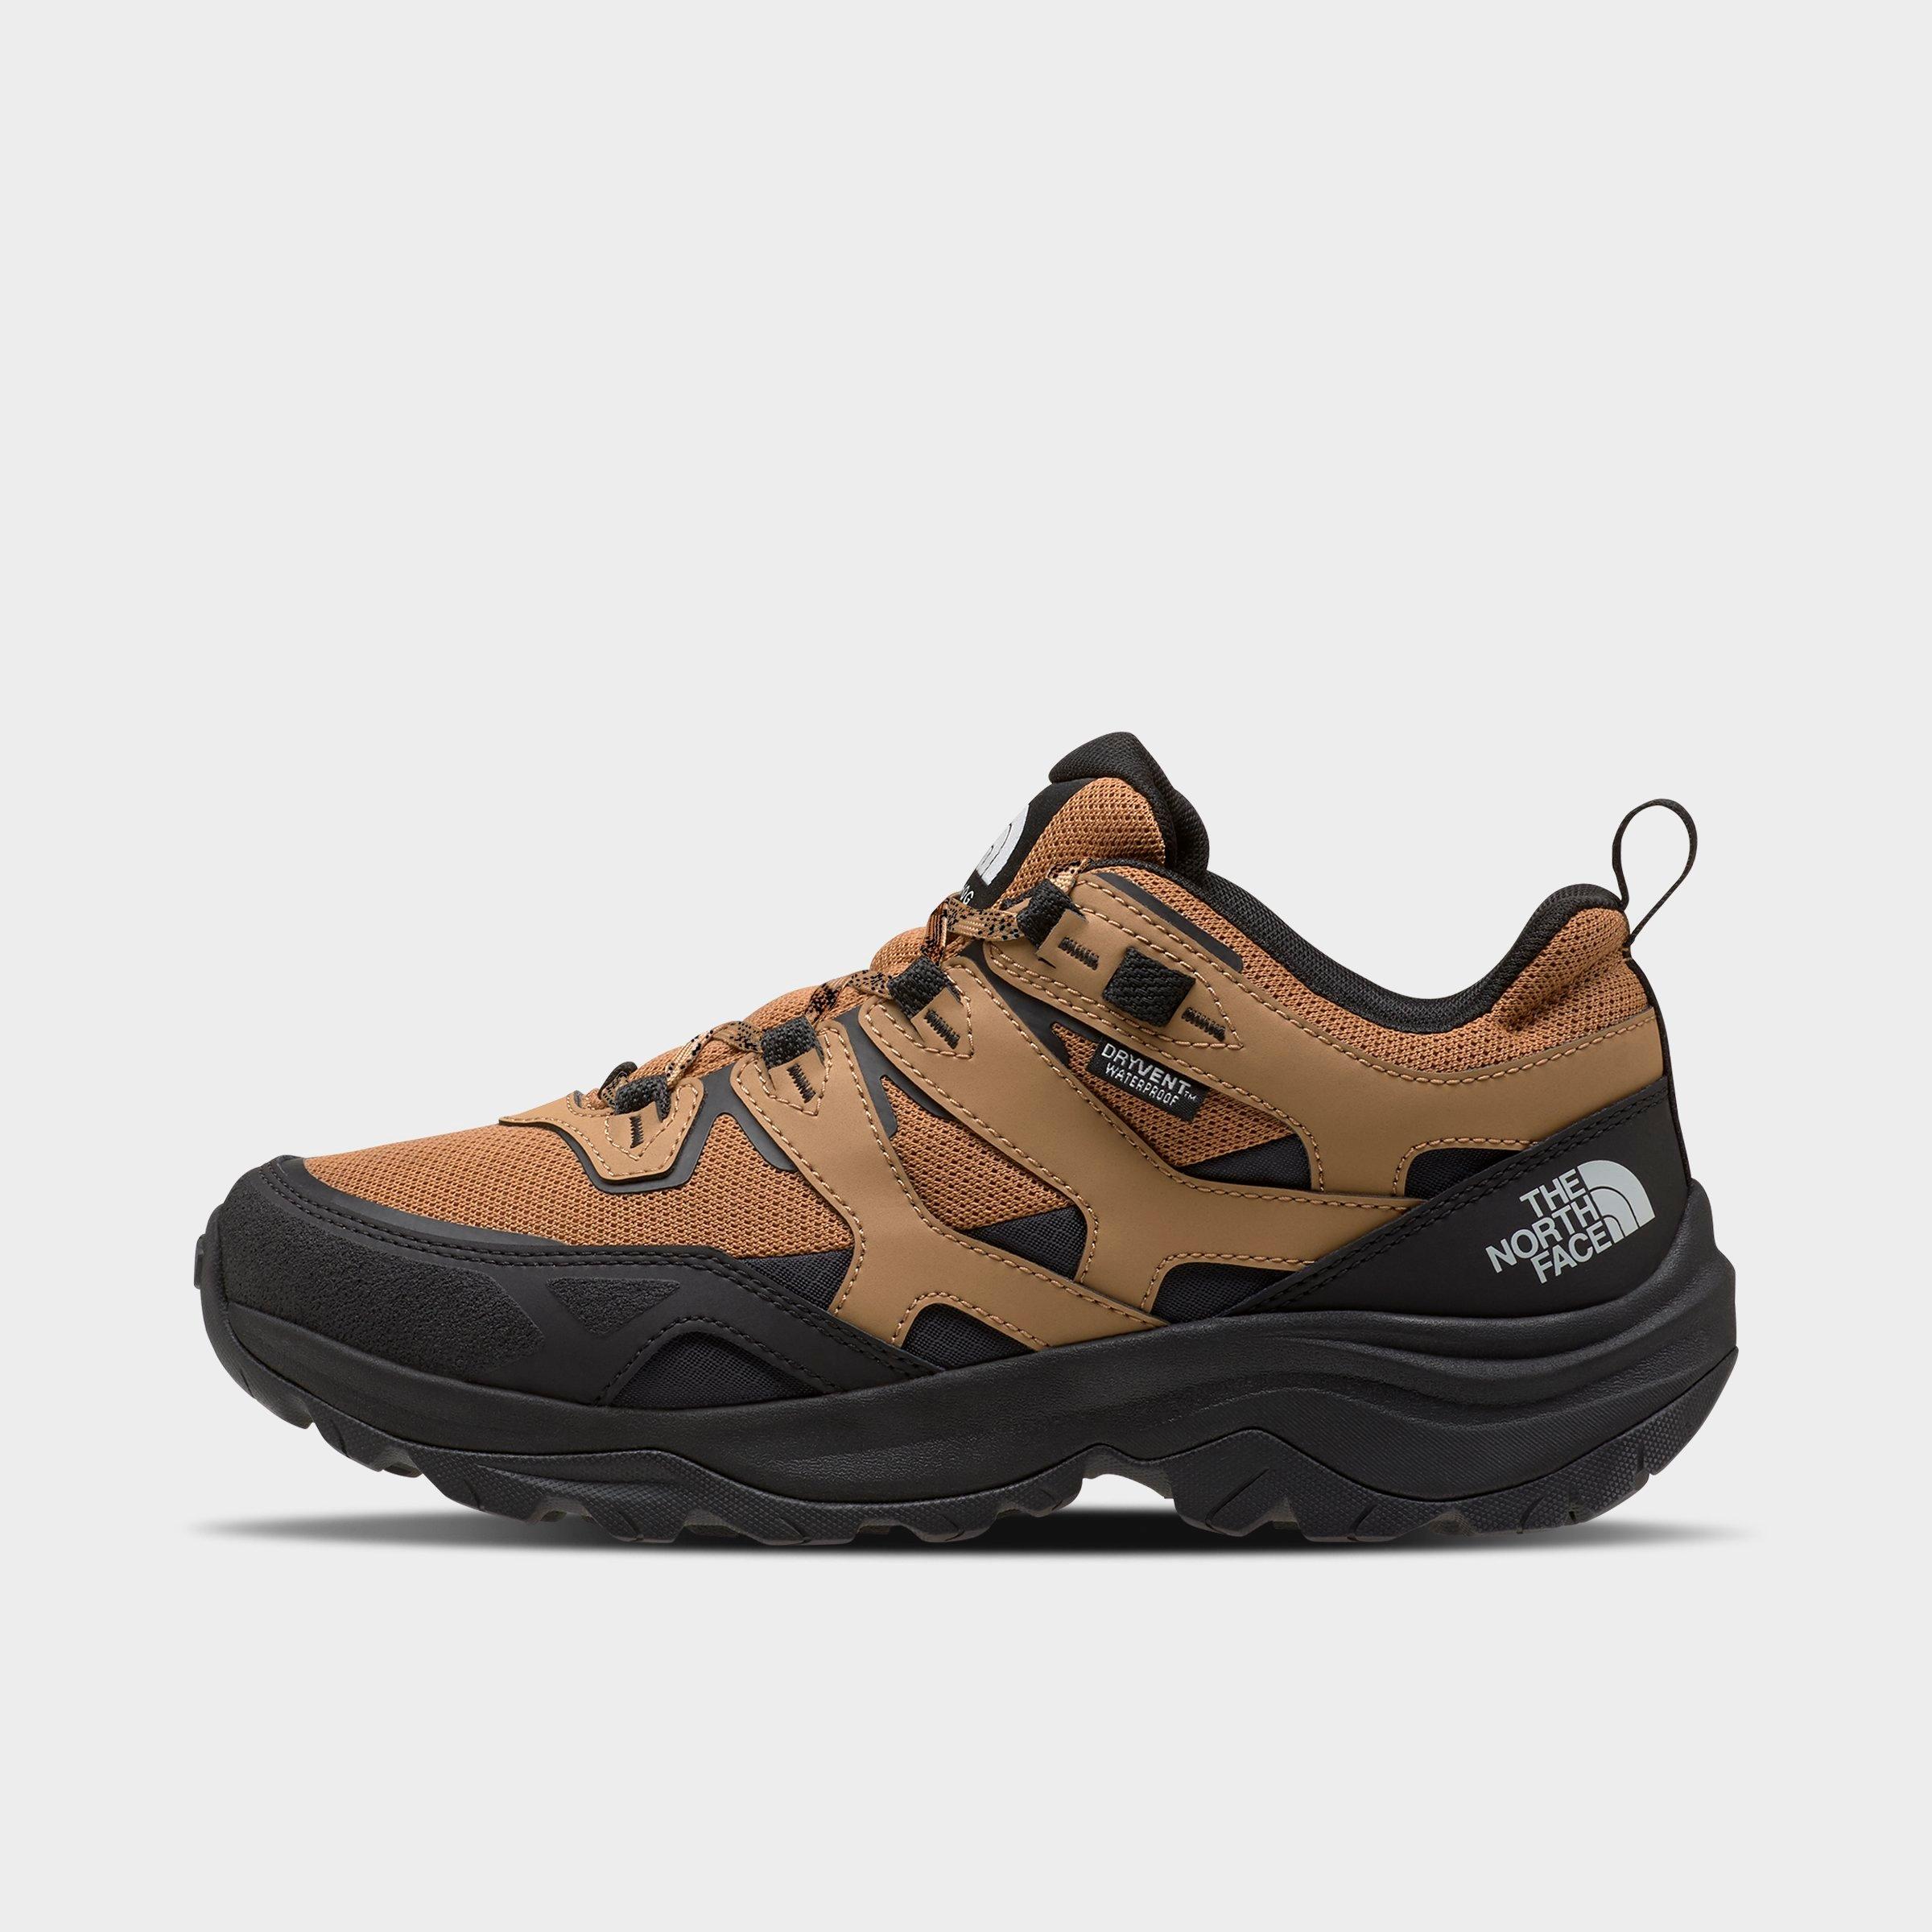 Shop The North Face Inc Men's Hedgehog 3 Mid Waterproof Hiking Shoes In Utility Brown/tnf Black